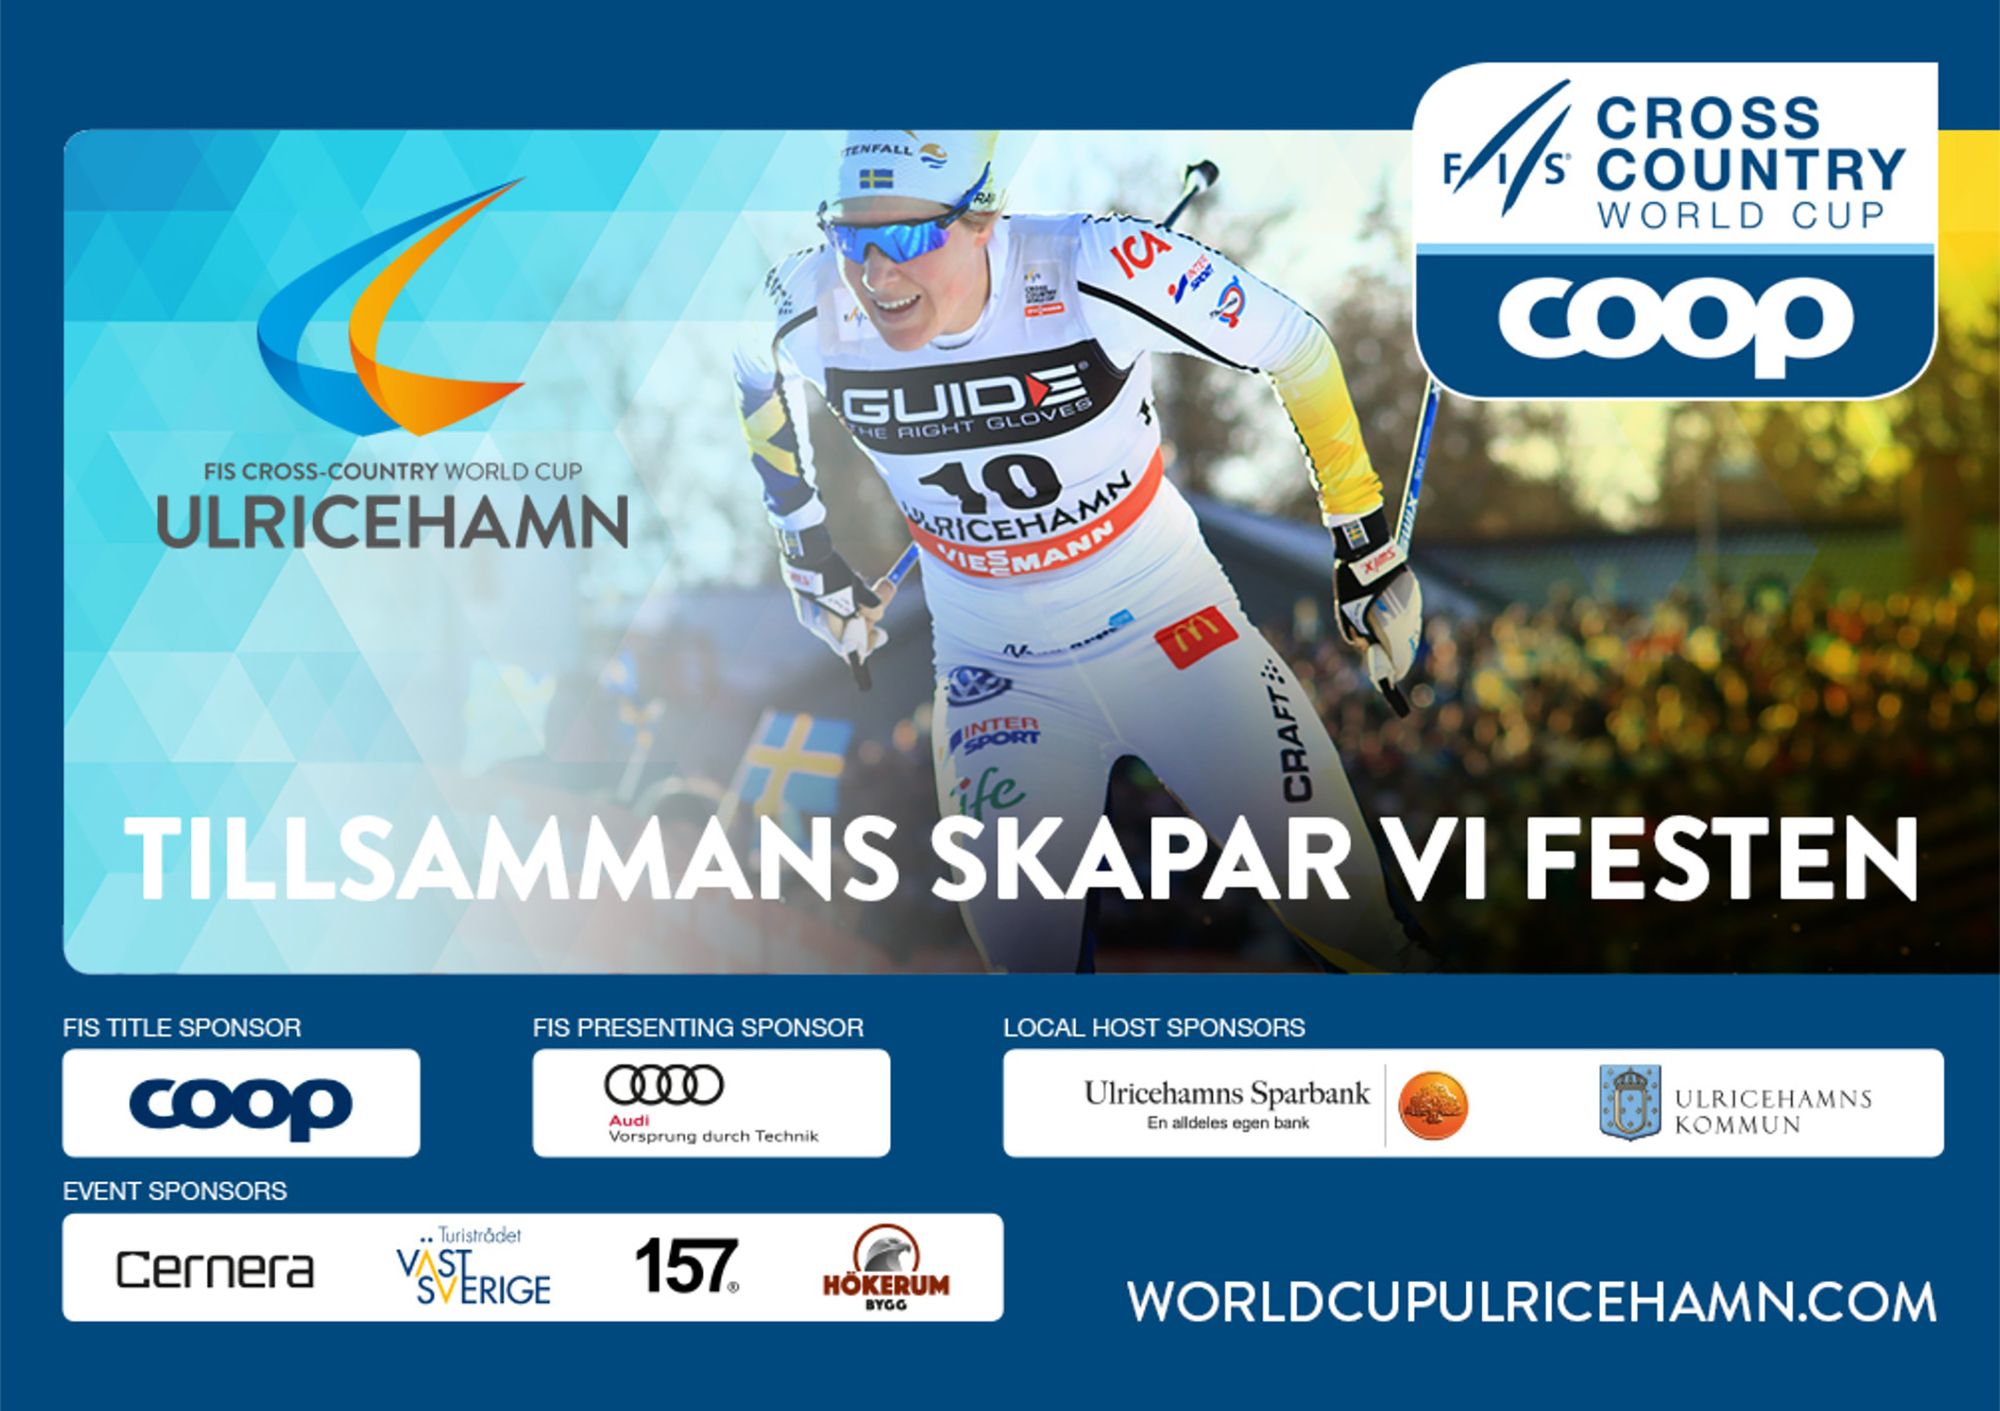 FIS Cross-country World cup 2019